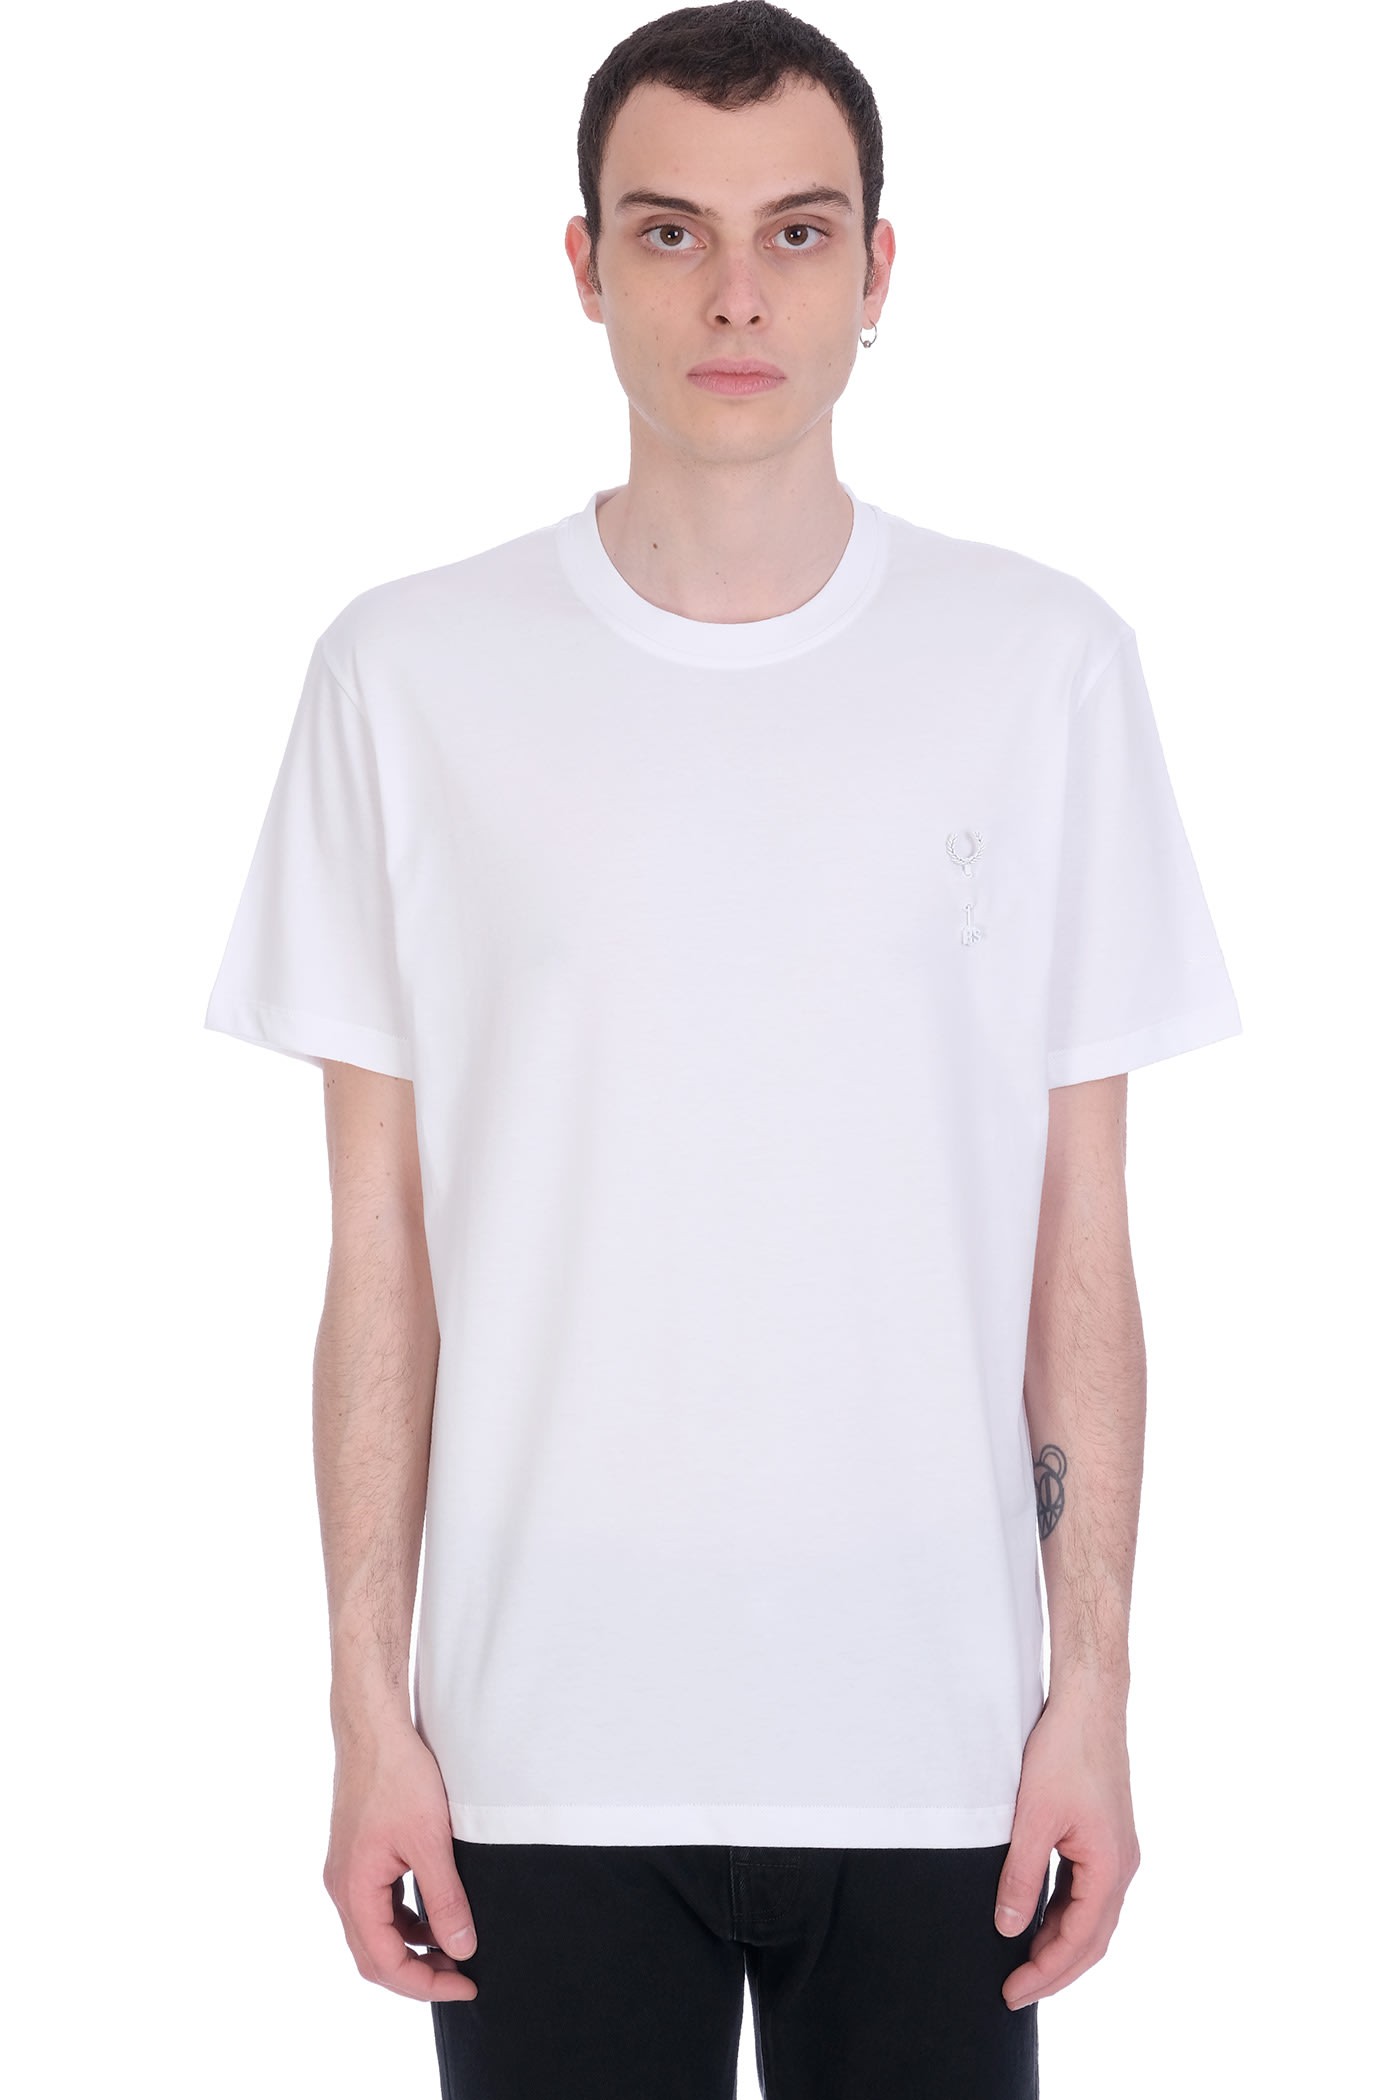 Fred Perry by Raf Simons T-shirt In White Cotton